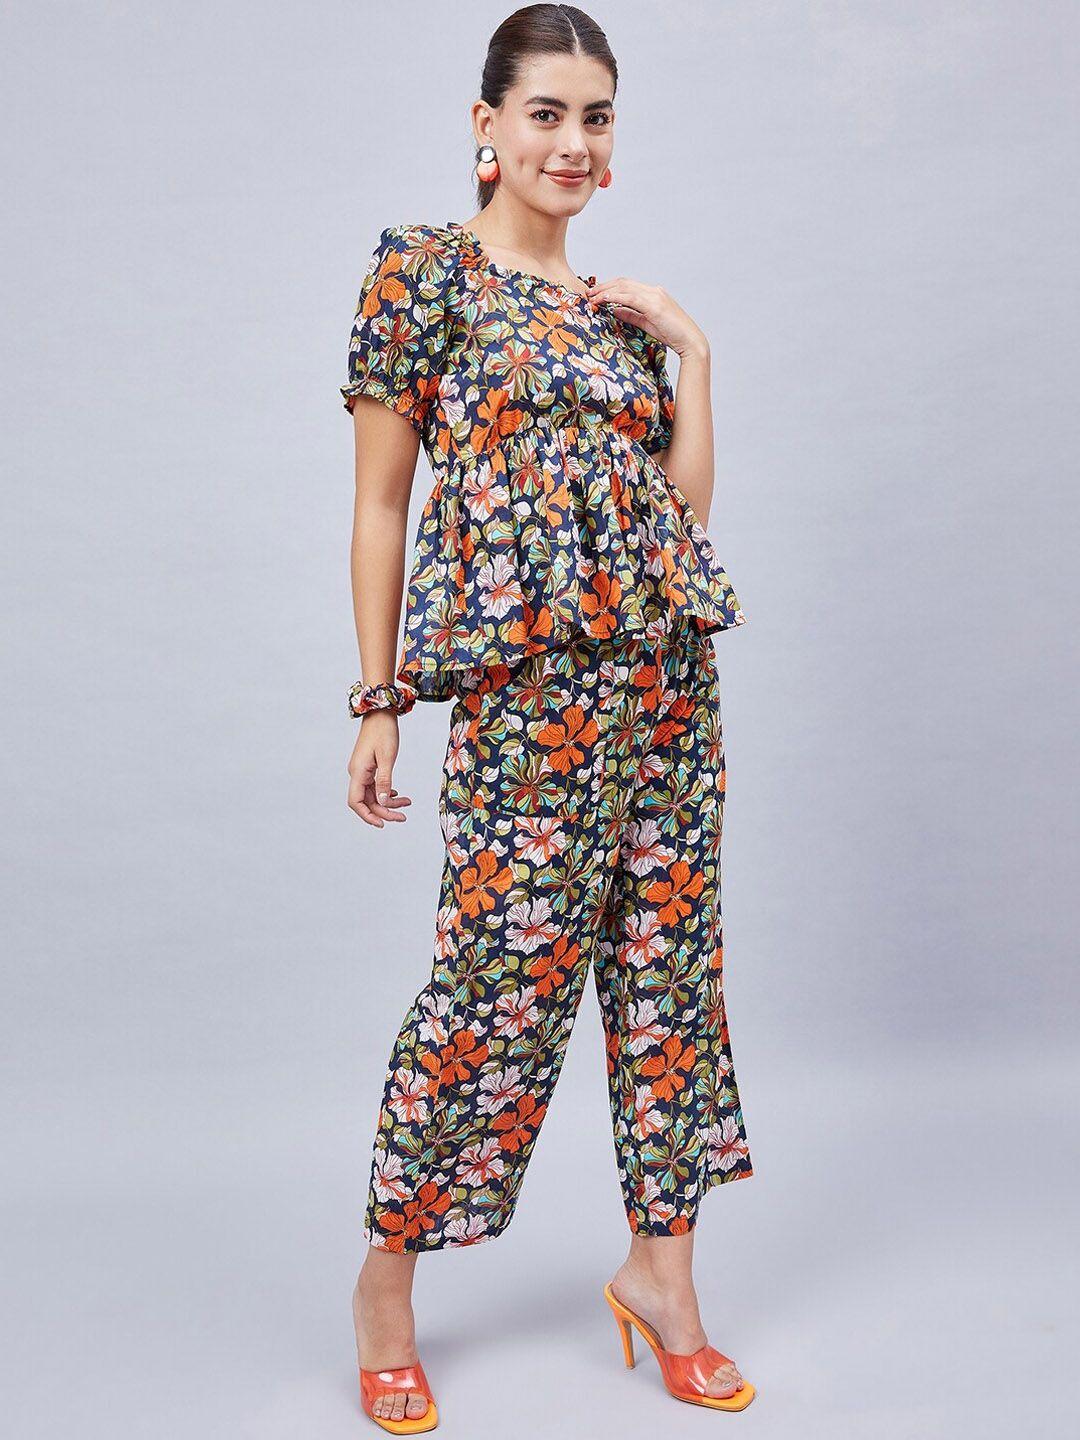 winered-floral-printed-pure-cotton-peplum-top-with-trousers-&-scrunchie-co-ords